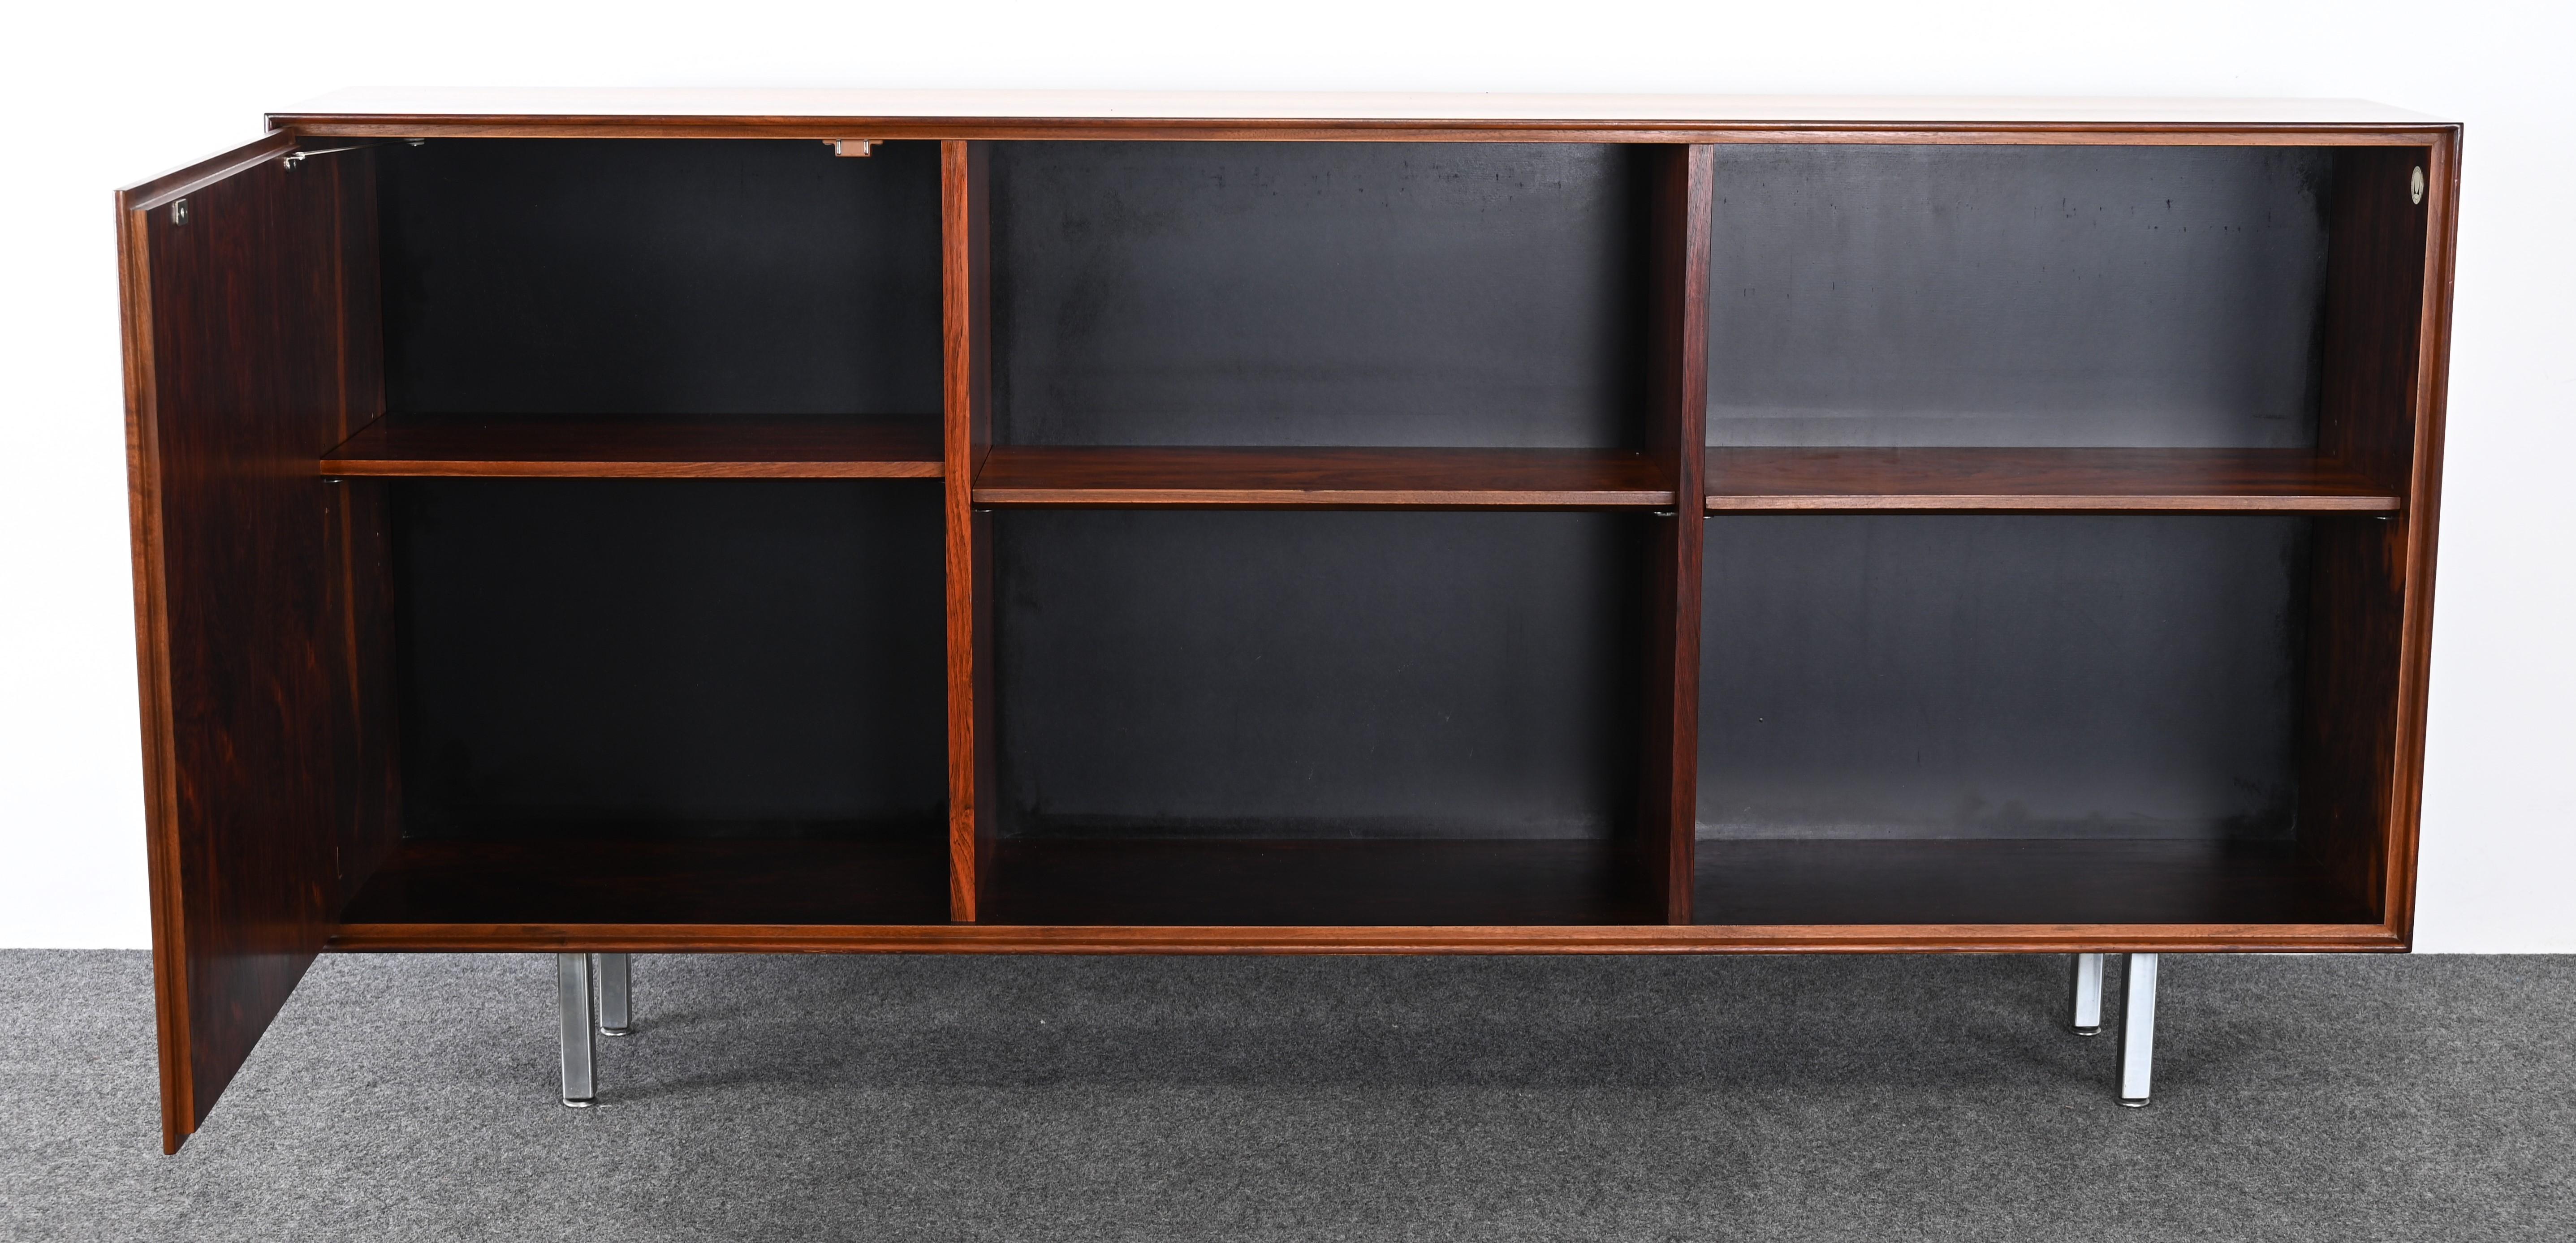 Rosewood Thin Edge Bookshelf by George Nelson for Herman Miller, 1950s For Sale 5